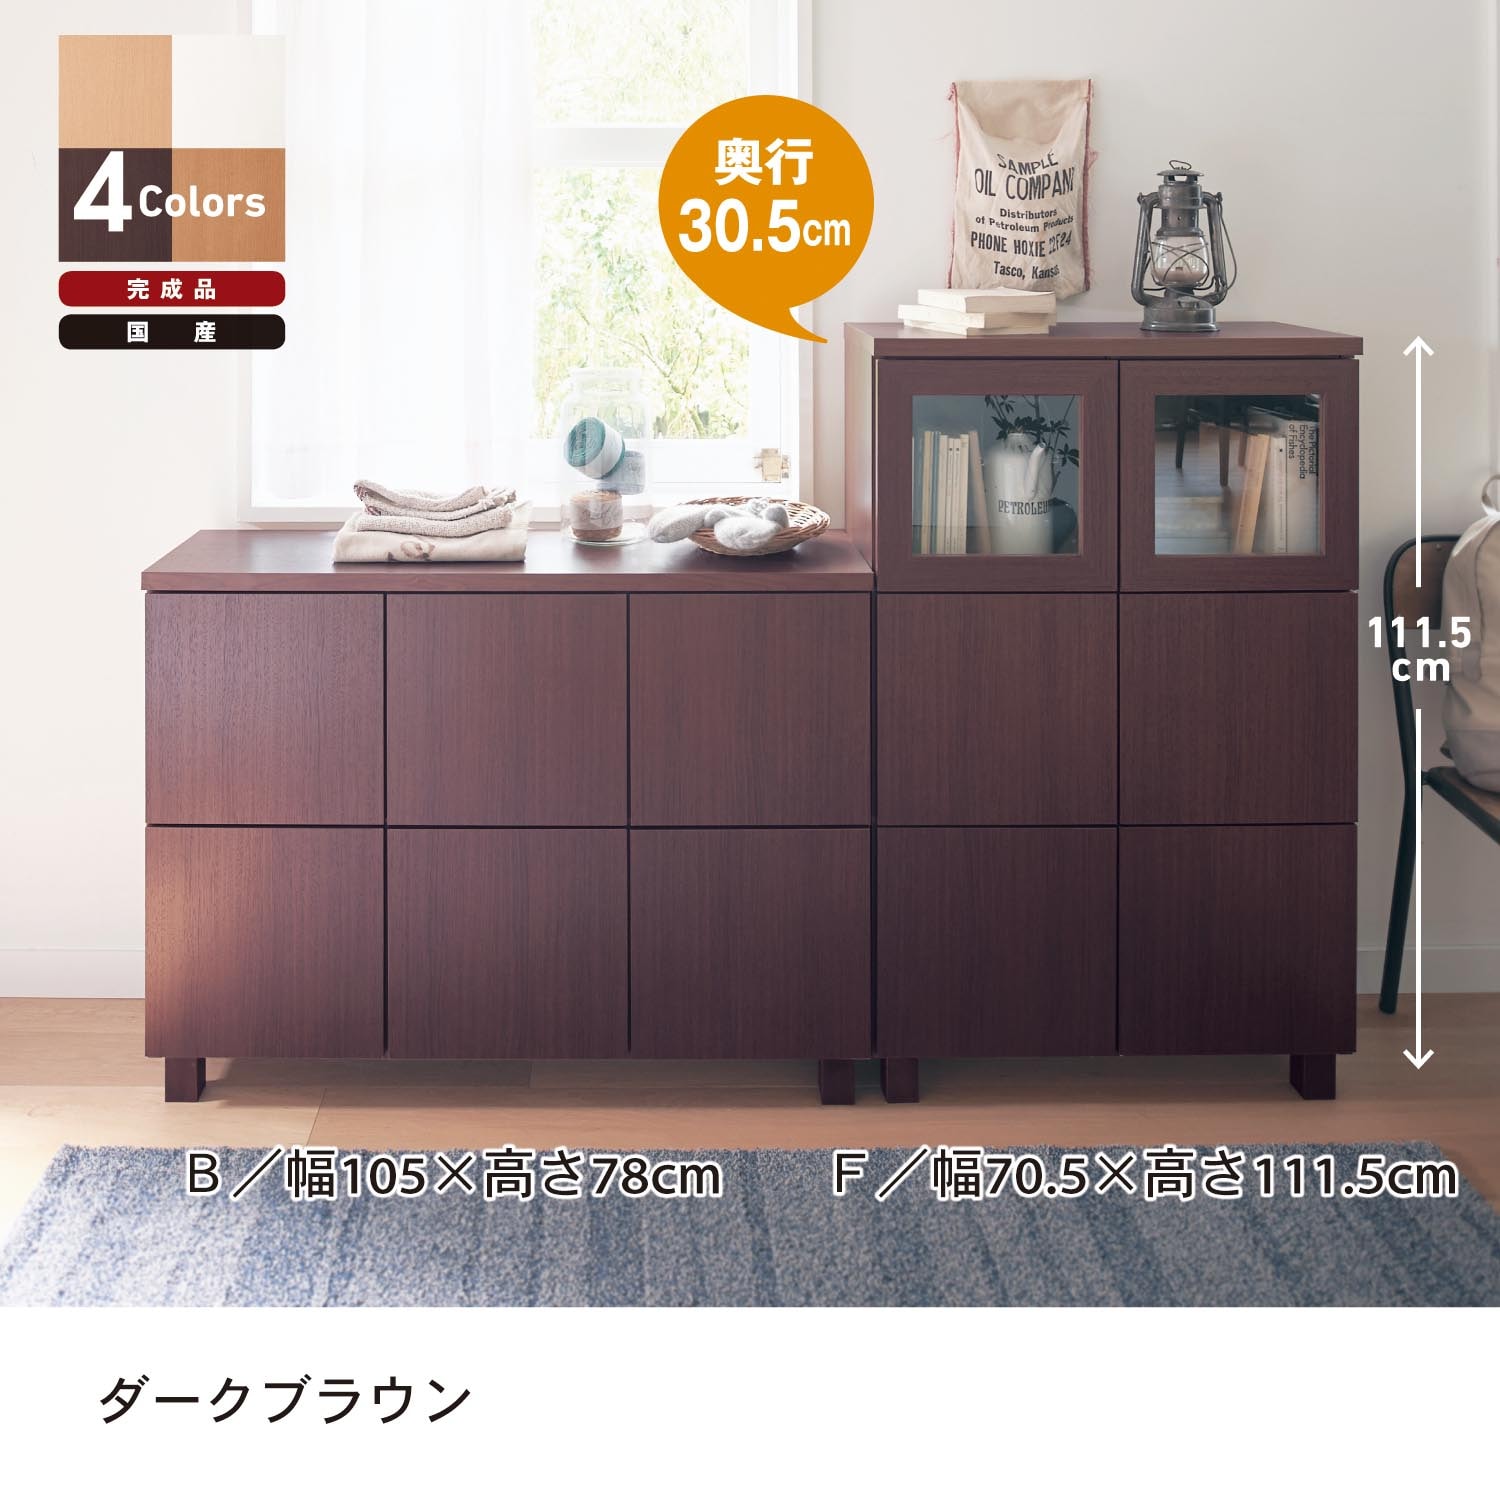 10%OFF！【BELLE MAISON DAYS】北欧ヴィンテージ調シェルフ